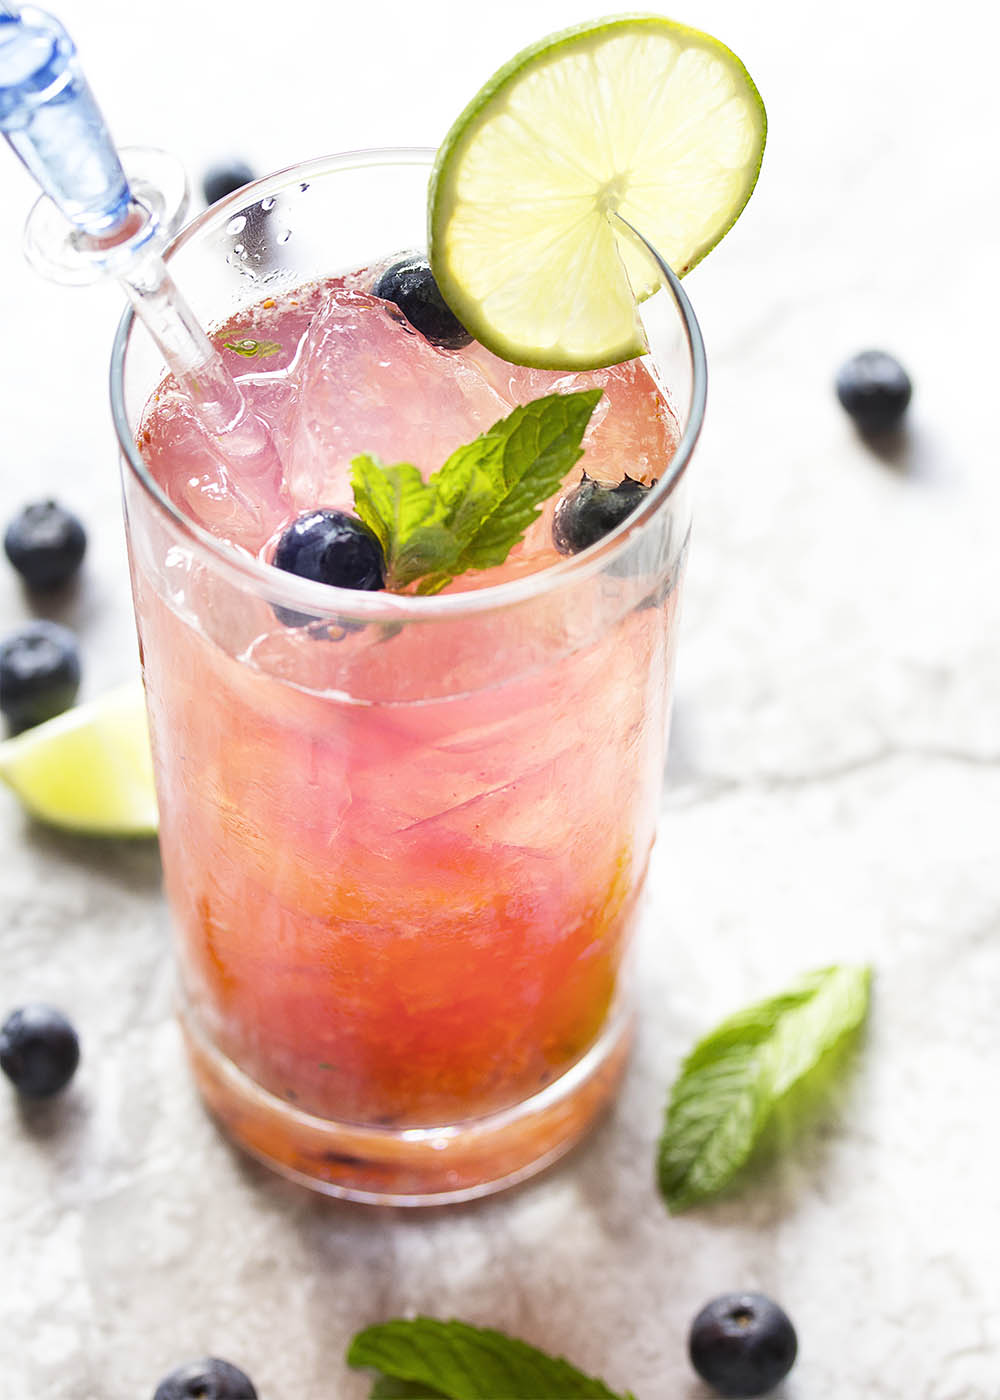 Fresh Blueberry Mojito - This blueberry mojito is full of fresh blueberry and mint flavor, and is an easy and refreshing summer drink perfect for sipping out of a straw. Great for cookouts or a warm evening on your deck! | justalittlebitofbacon.com